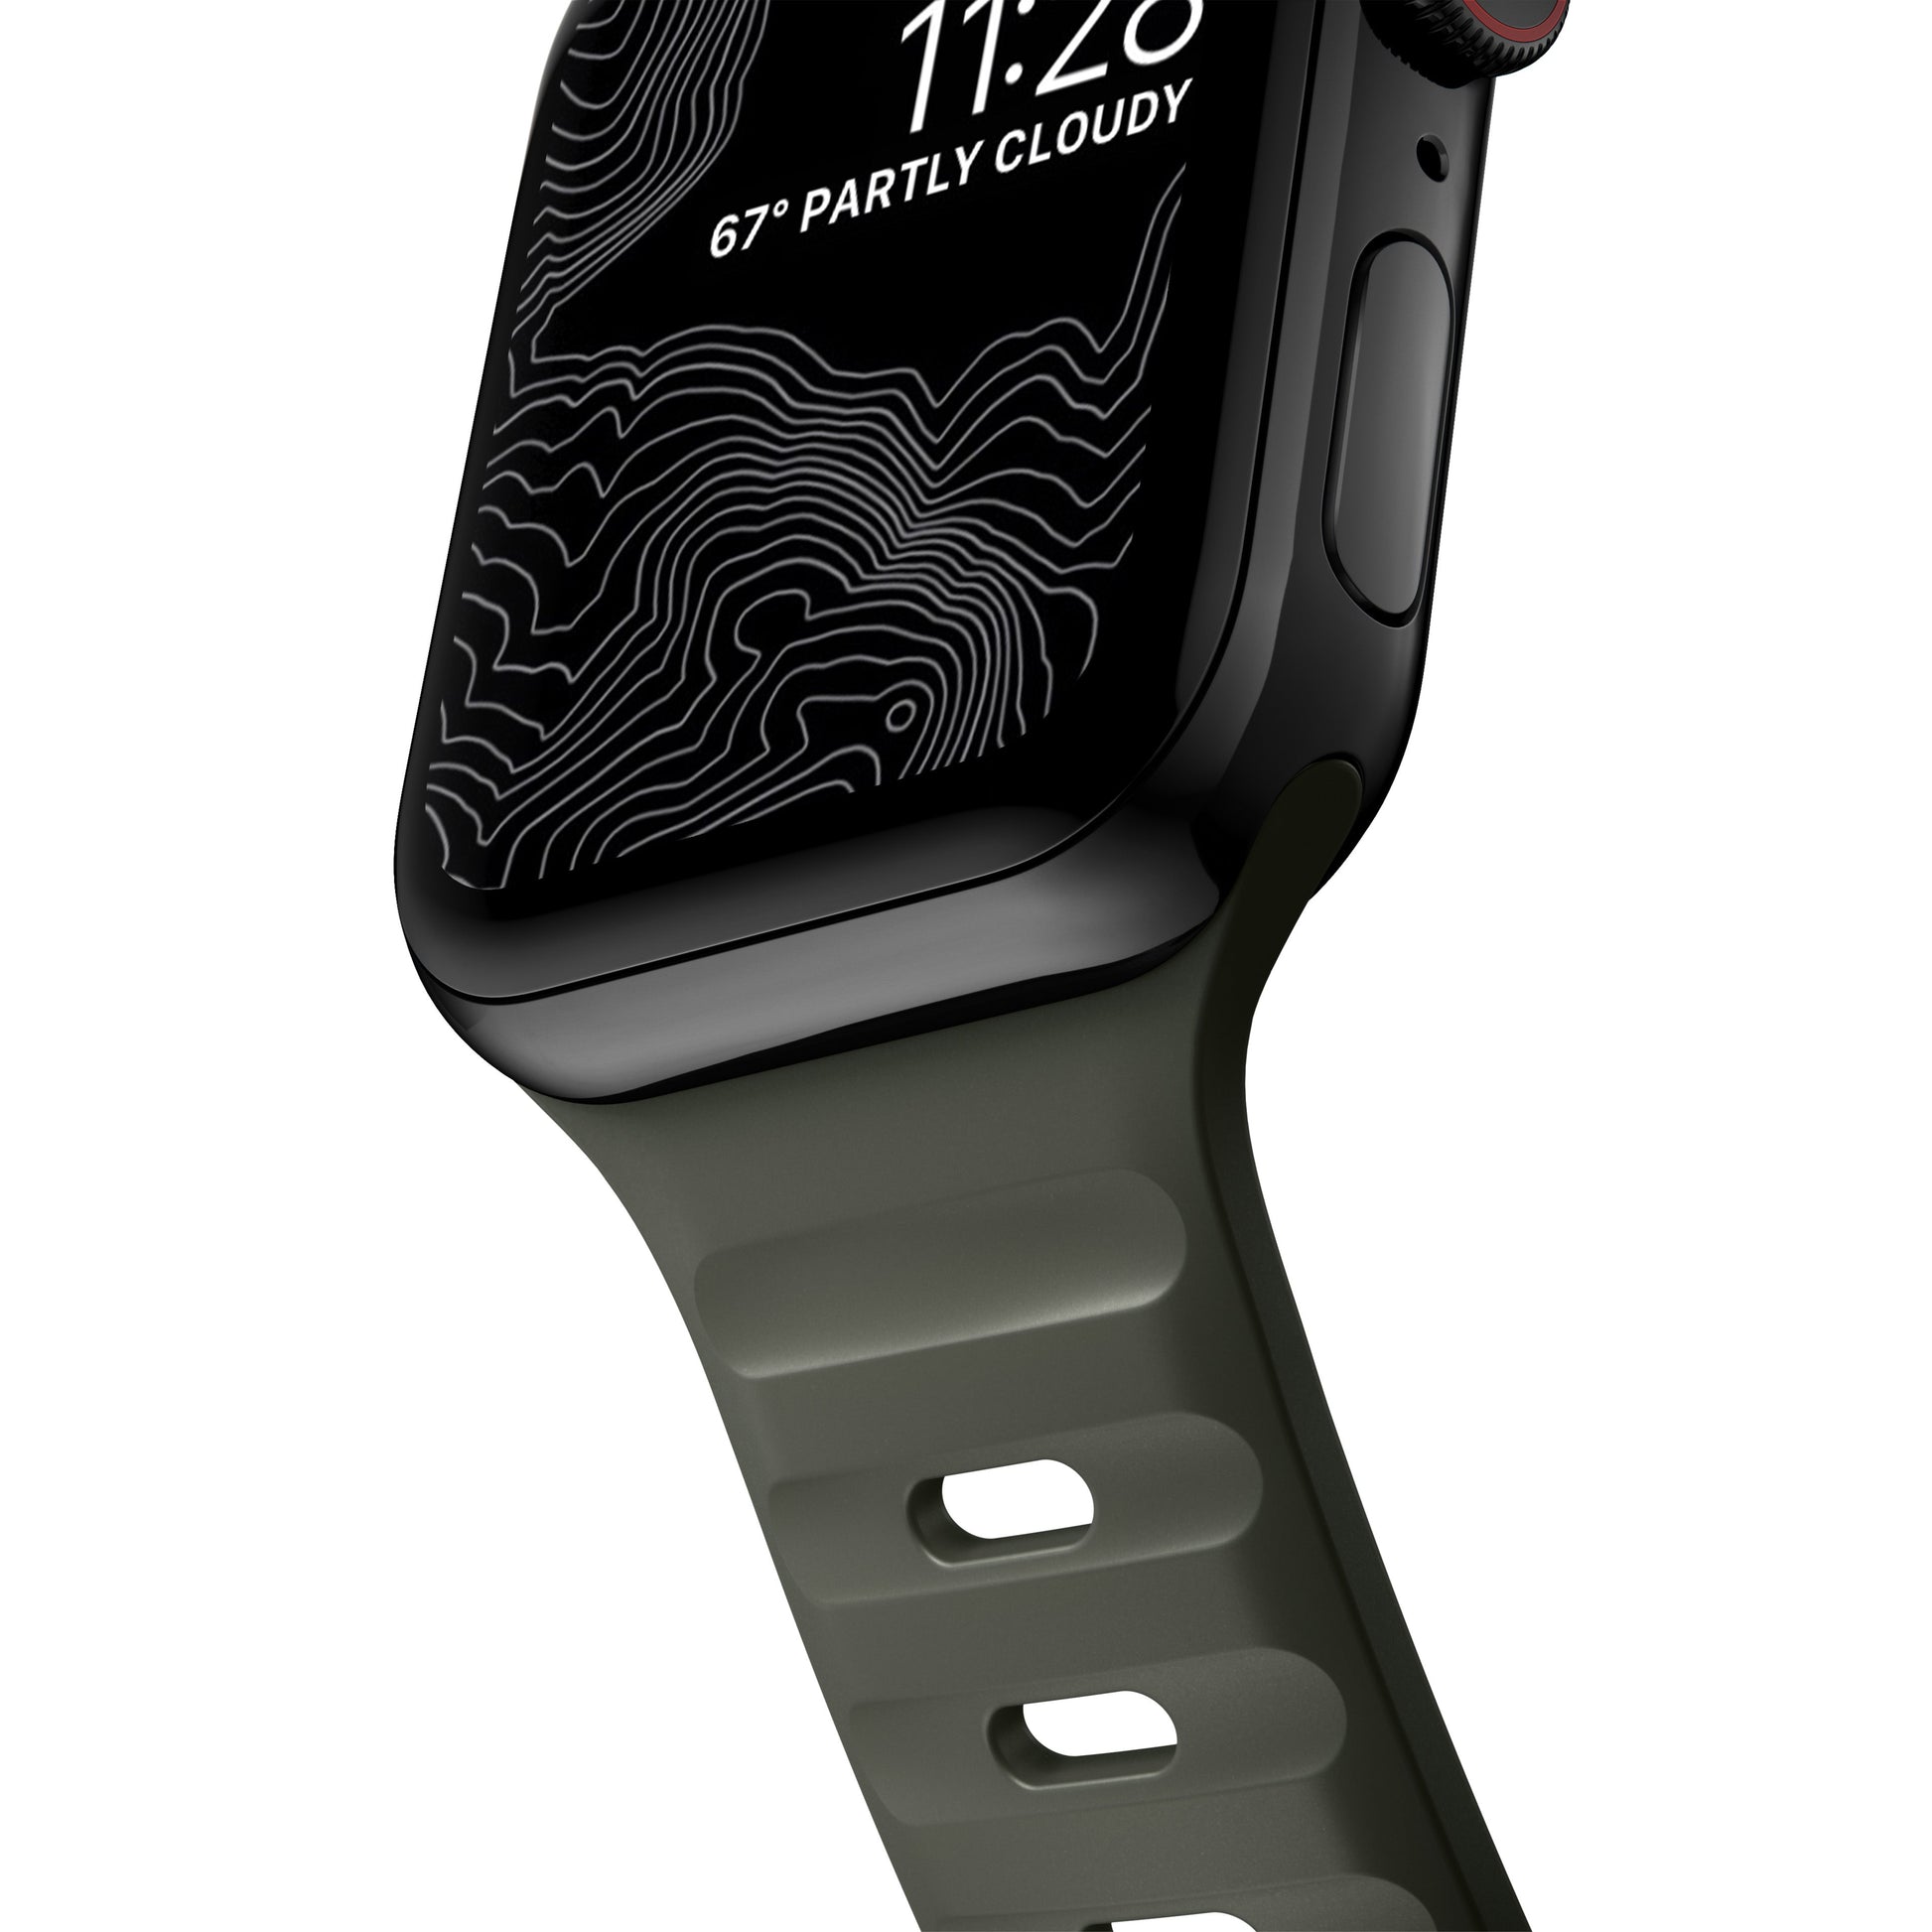 Nomad Sport Strap for Apple Watch 45/44mm - The Usual